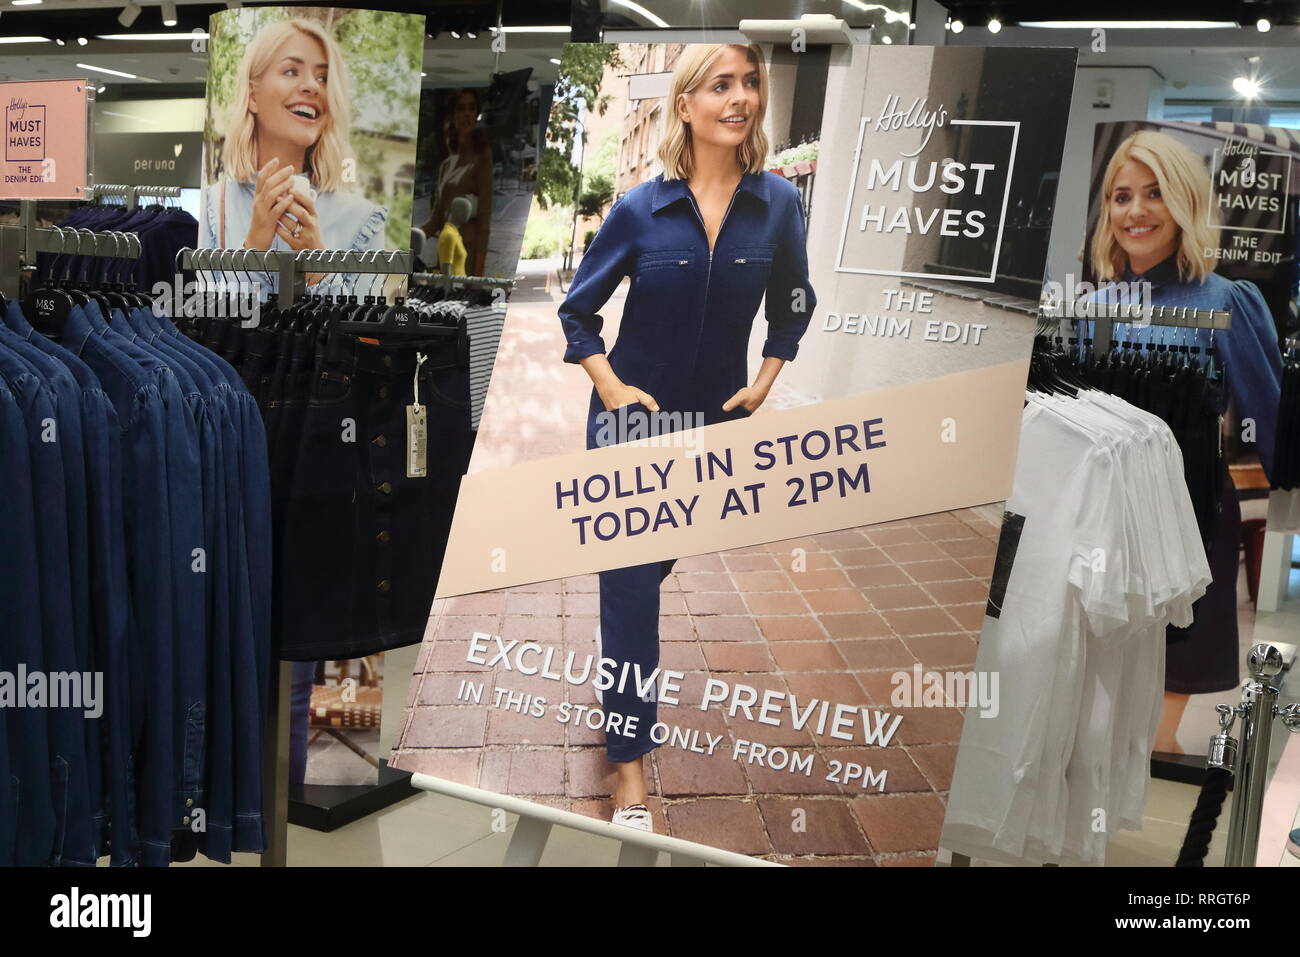 Holly Willoughby, ITV's This Morning presenter hosts press launch and exclusive preview at the Marks & Spencer, Westfield London.  Holly celebrates her new M&S Must-Haves collection by wearing some of the denim range of clothes Stock Photo